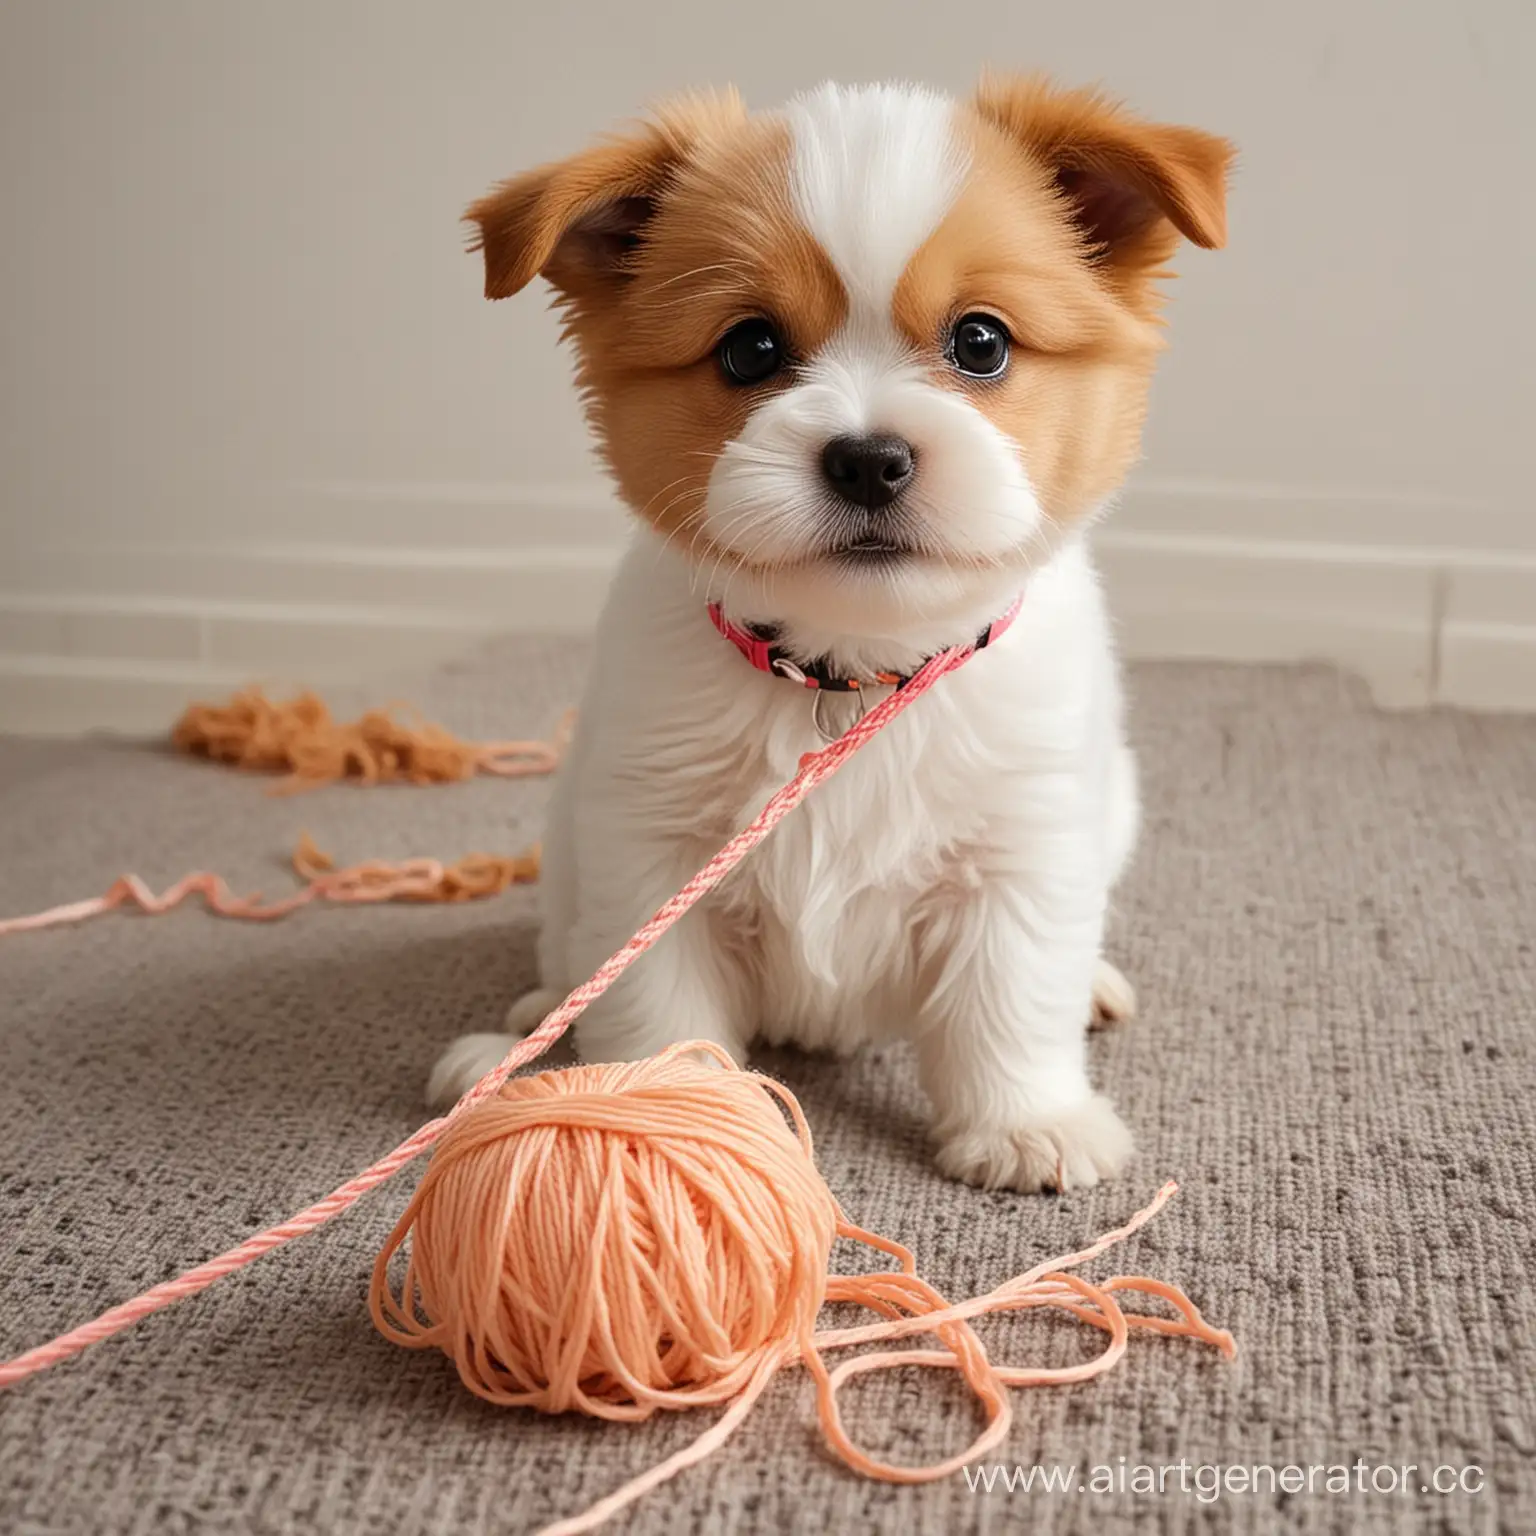 Adorable-Dog-Playing-with-Colorful-Yarn-in-Playful-Delight